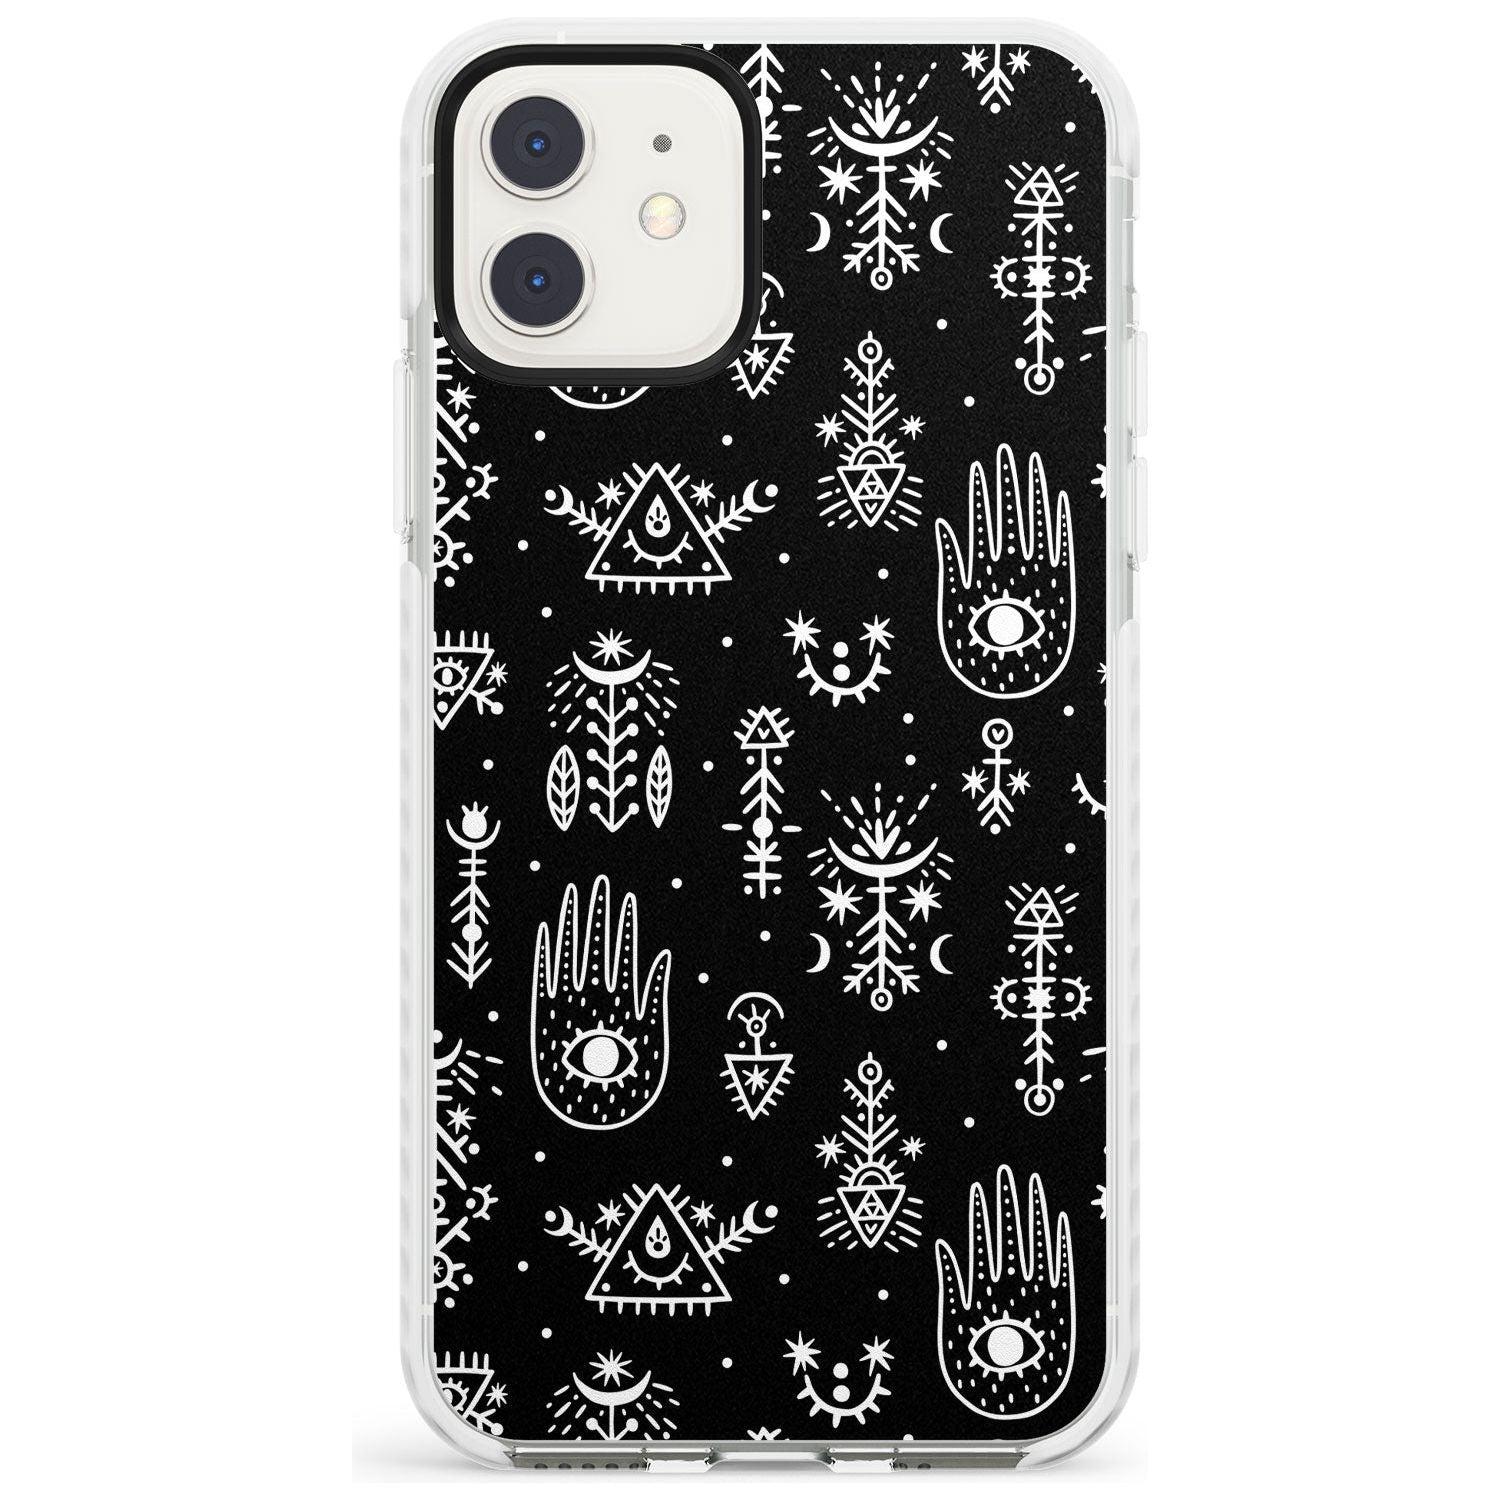 Tribal Palms - White on Black Impact Phone Case for iPhone 11